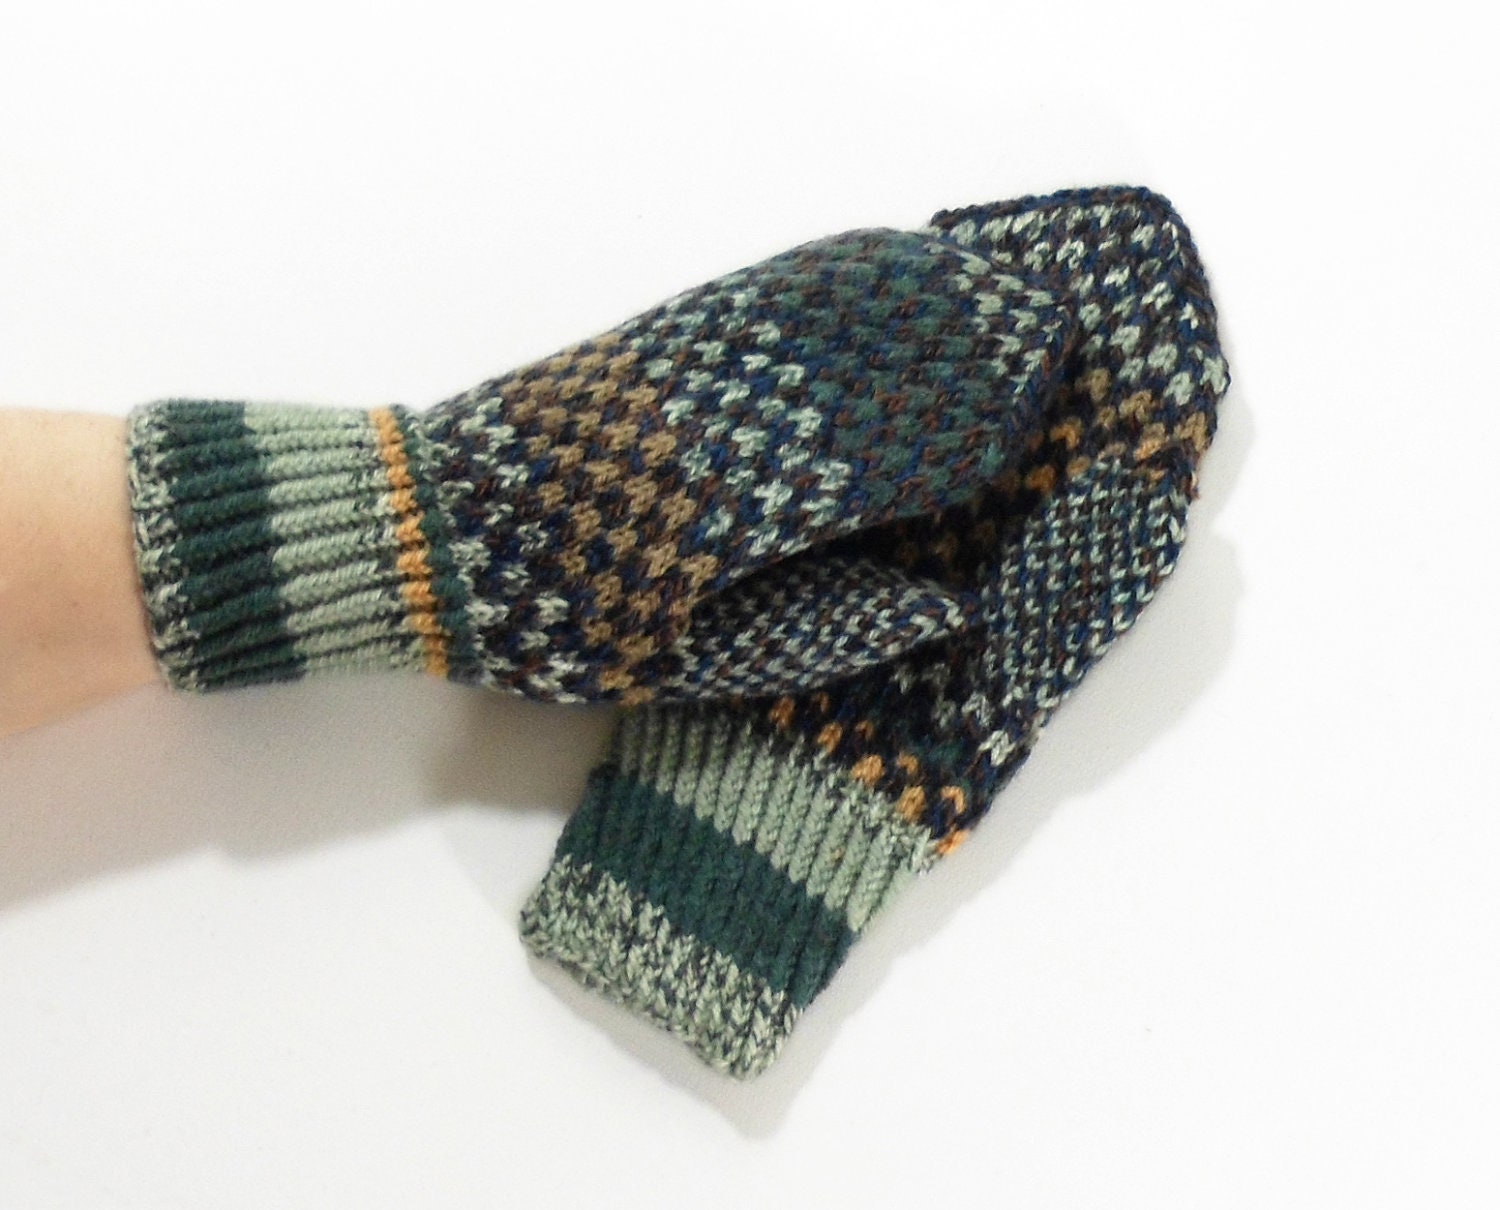 Hand Knitted Mittens - Gray and Green, Size Large - UnlimitedCraftworks